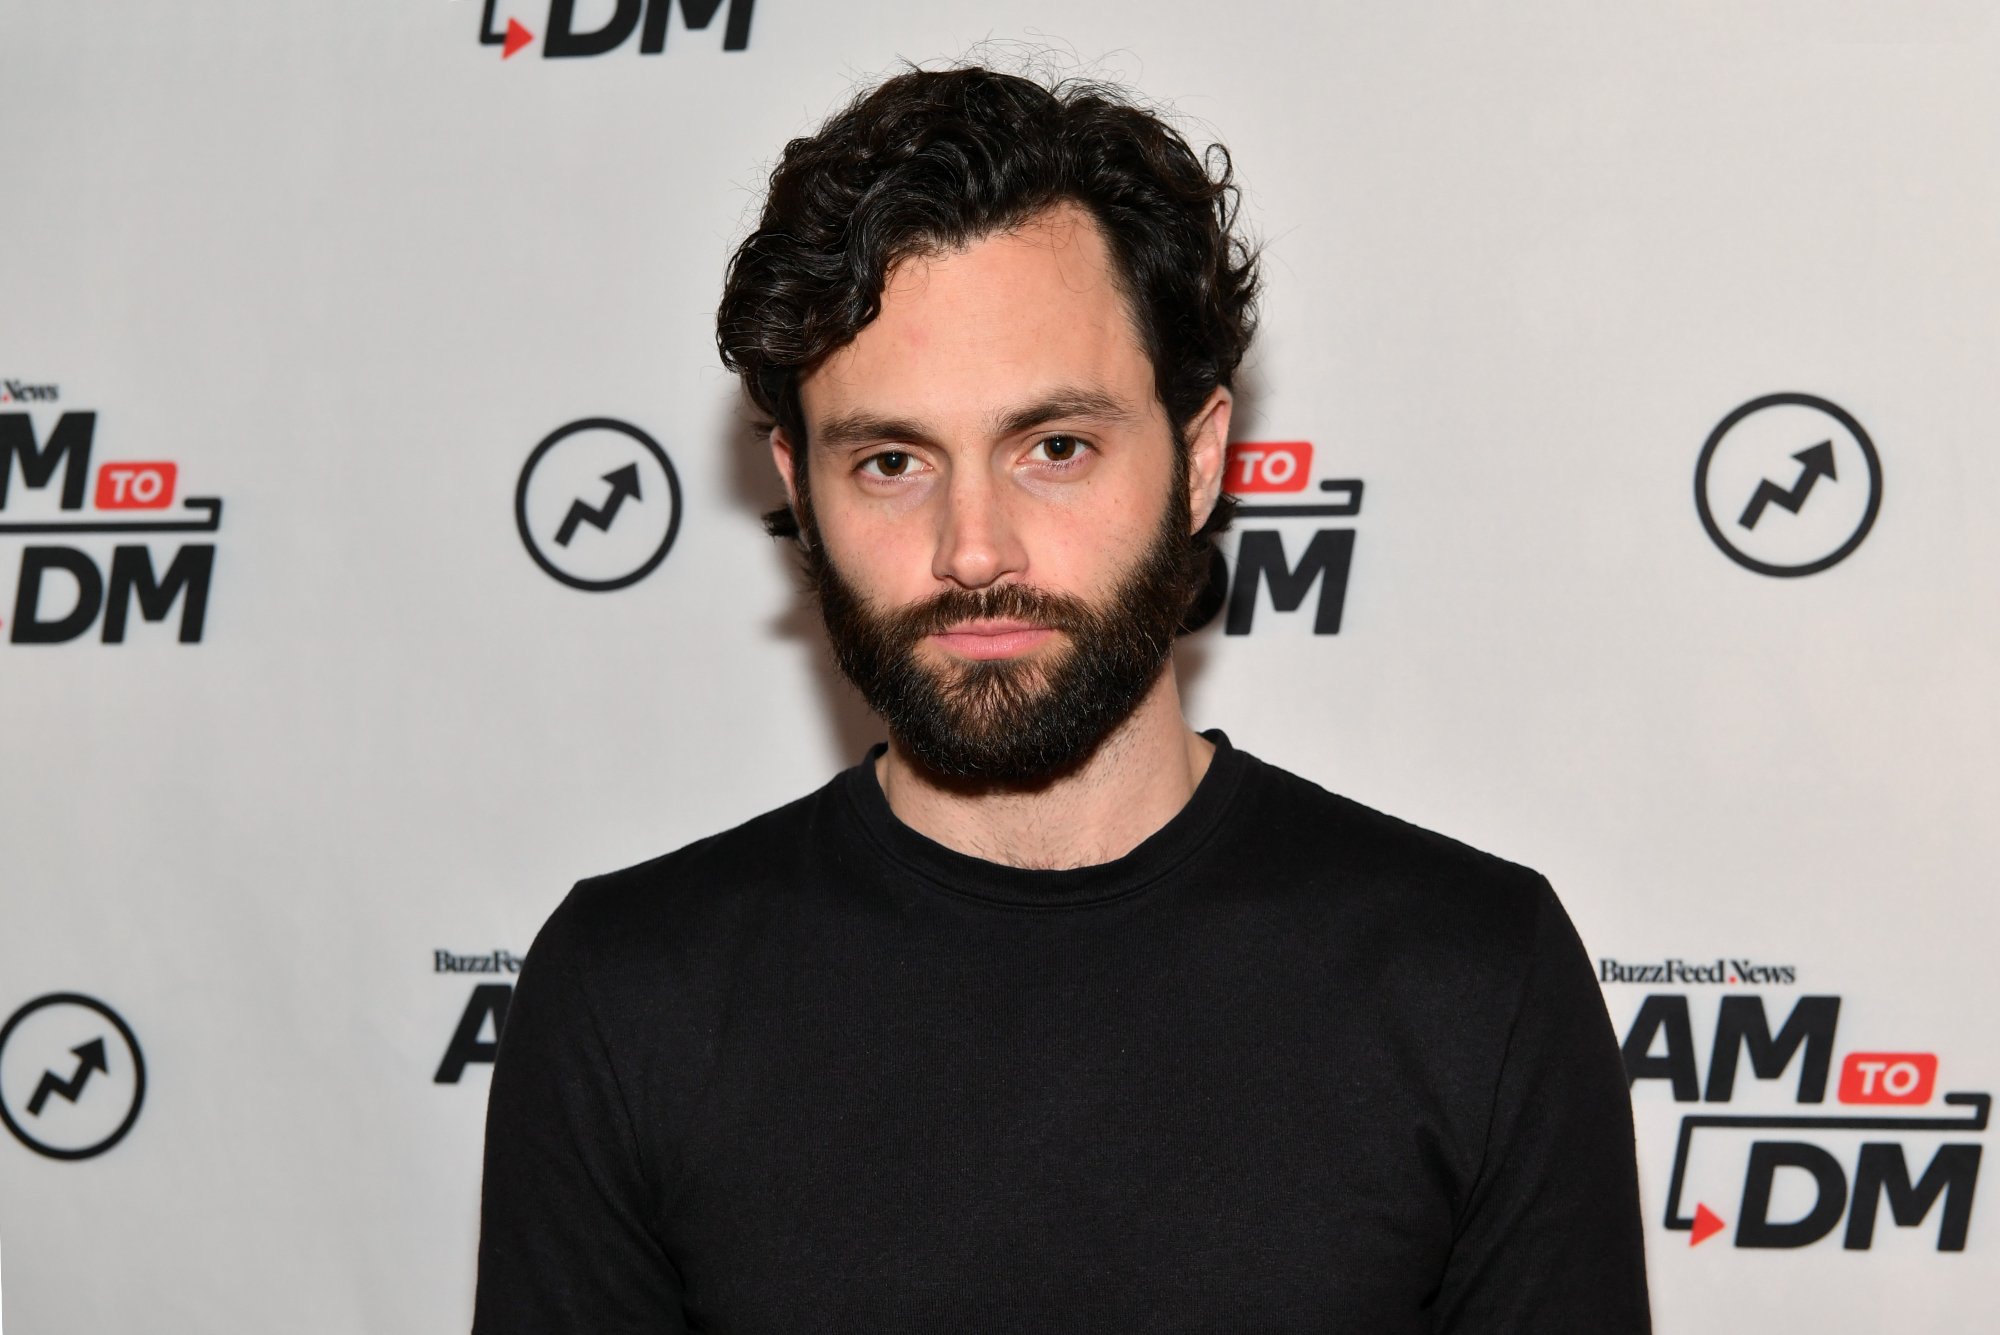 Penn Badgley, who is rumored to be part of 'Fantastic Four' cast. Wearing a black long-sleeve shirt and standing in front of a step and repeat.